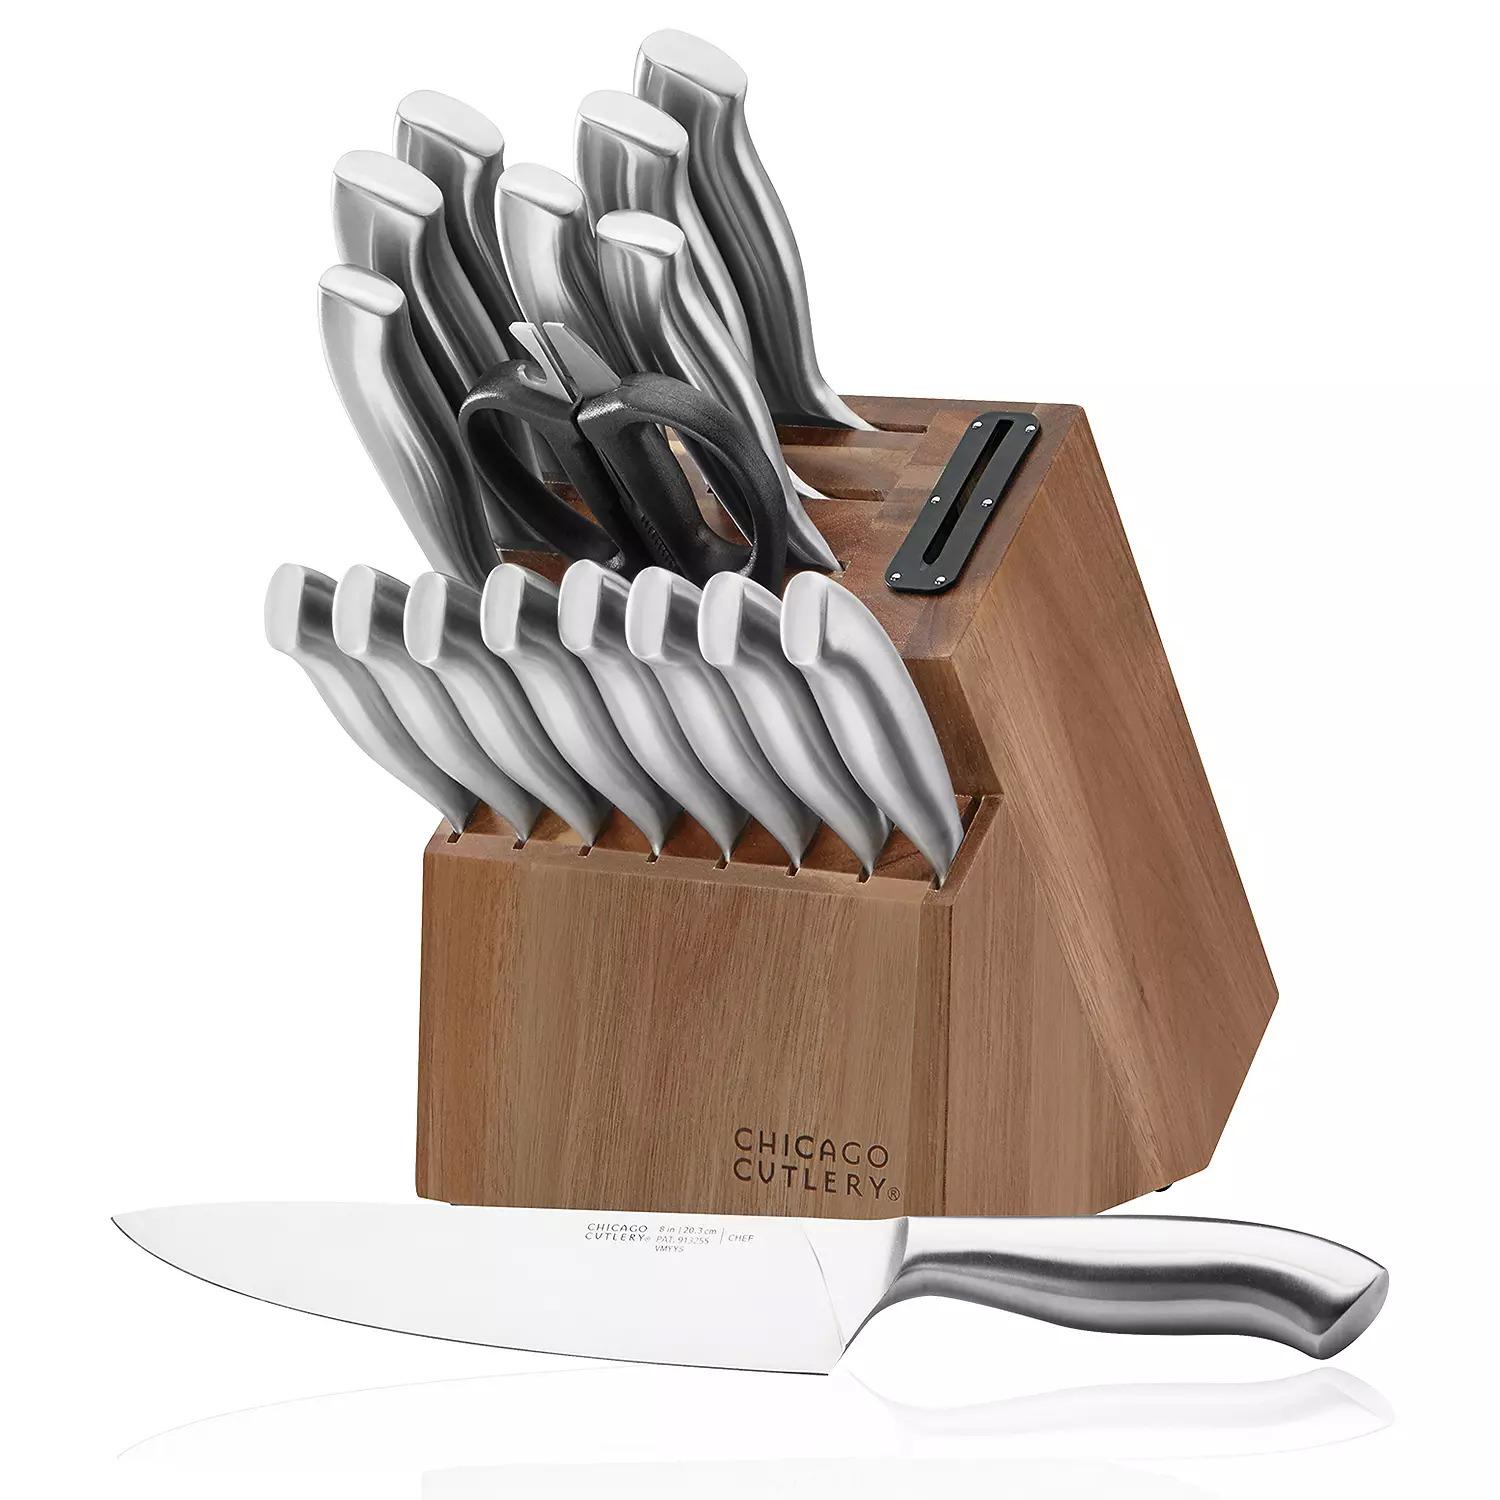 Chicago Cutlery Insignia Stainless Steel Knife Block Set for $84.99 Shipped